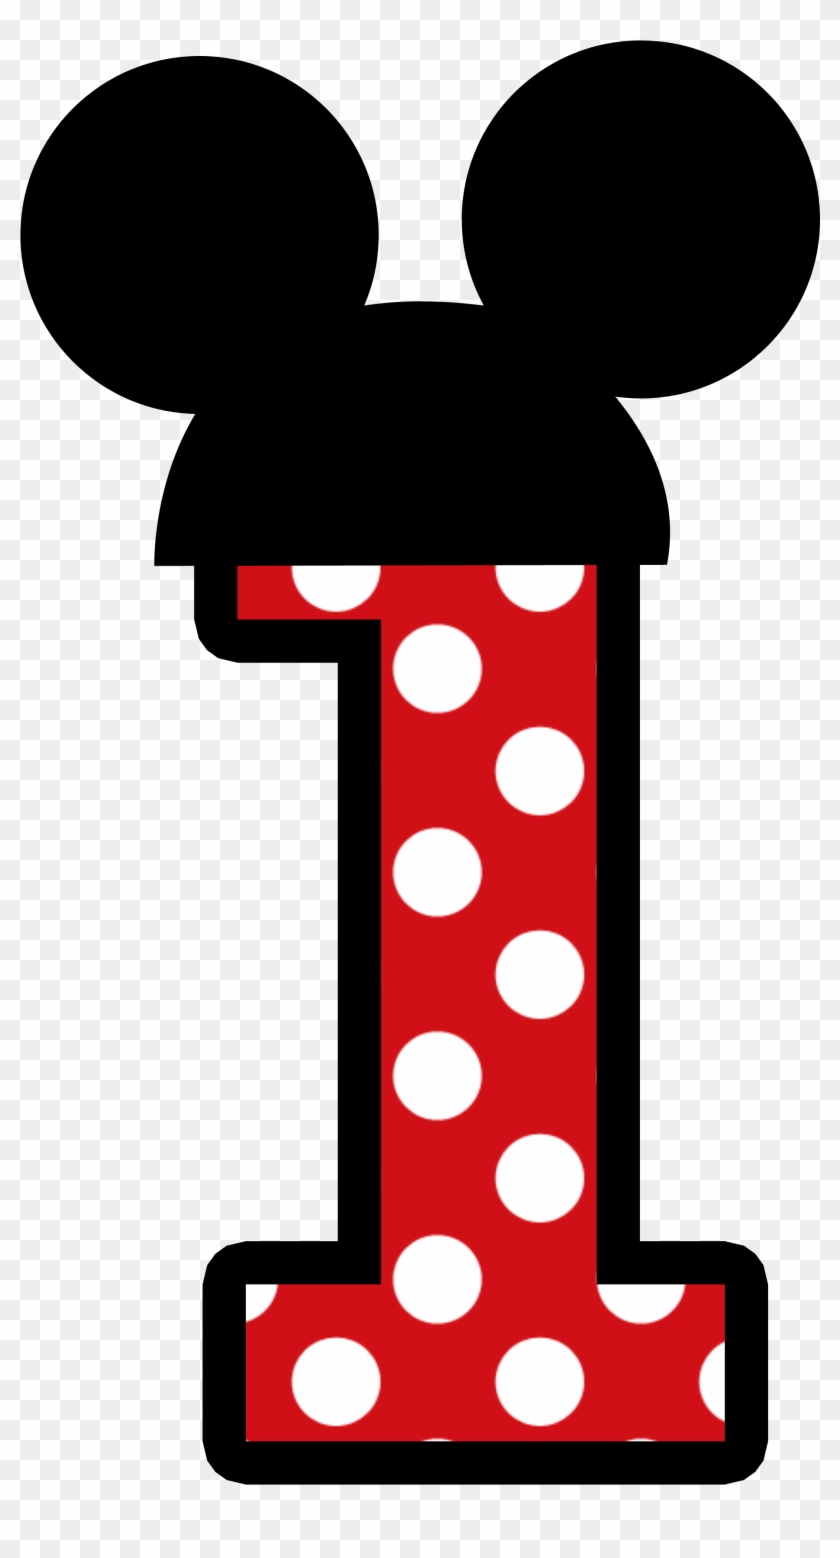 Image Transparent Stock E Minnie Minus Dressup And - Number 1 Mickey Mouse Png Clipart #163621